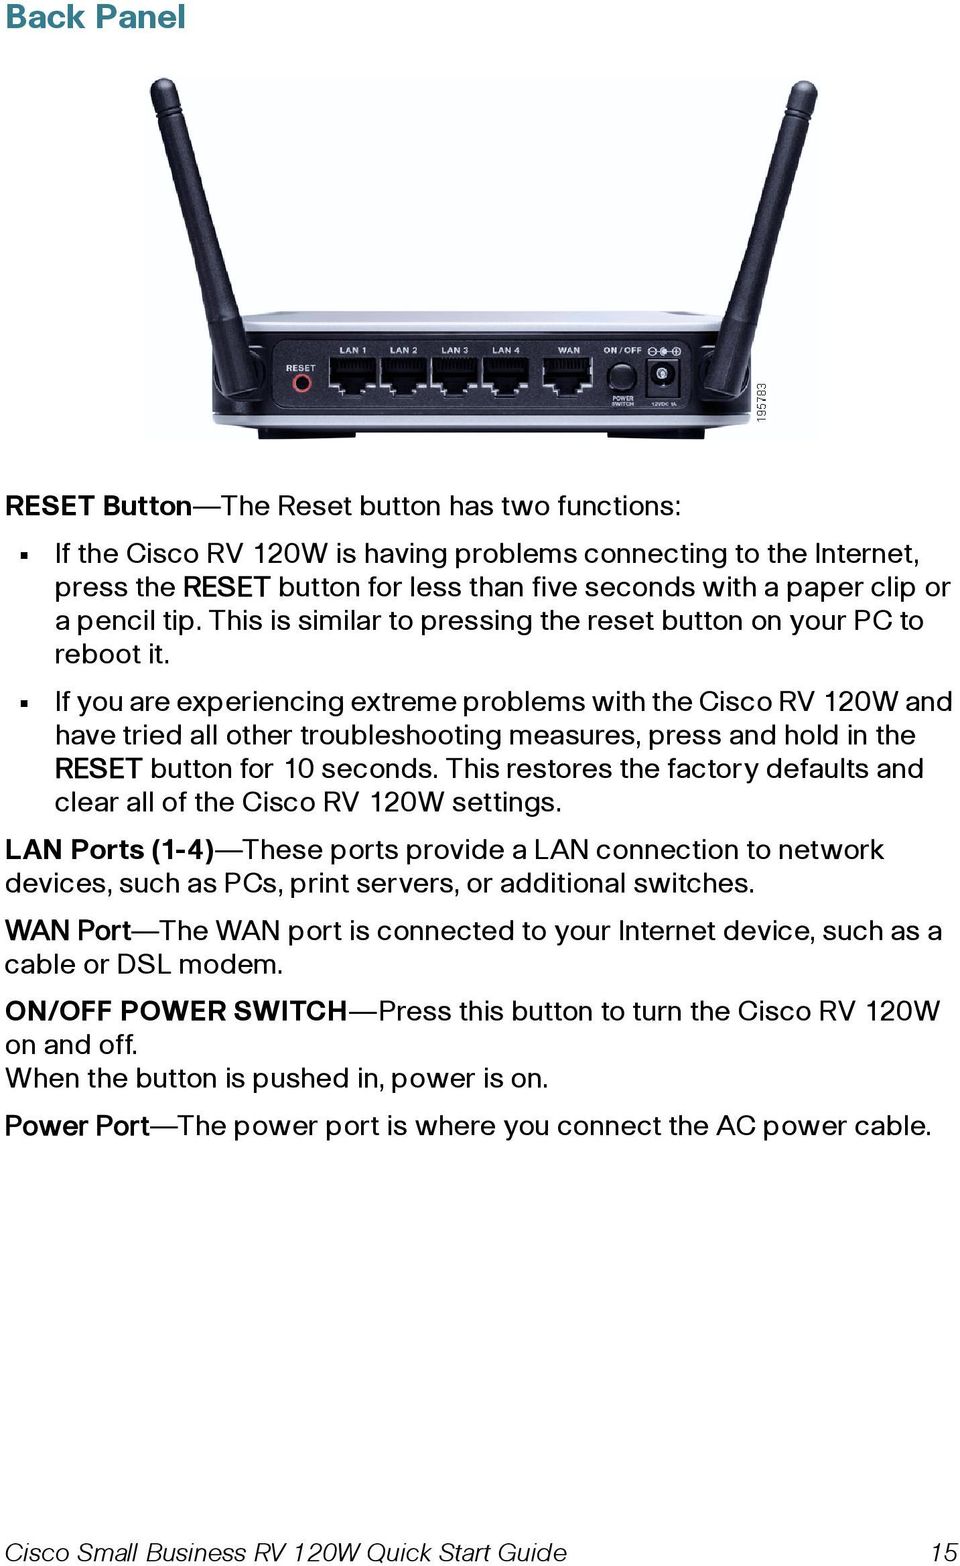 If you are experiencing extreme problems with the Cisco RV 120W and have tried all other troubleshooting measures, press and hold in the RESET button for 10 seconds.